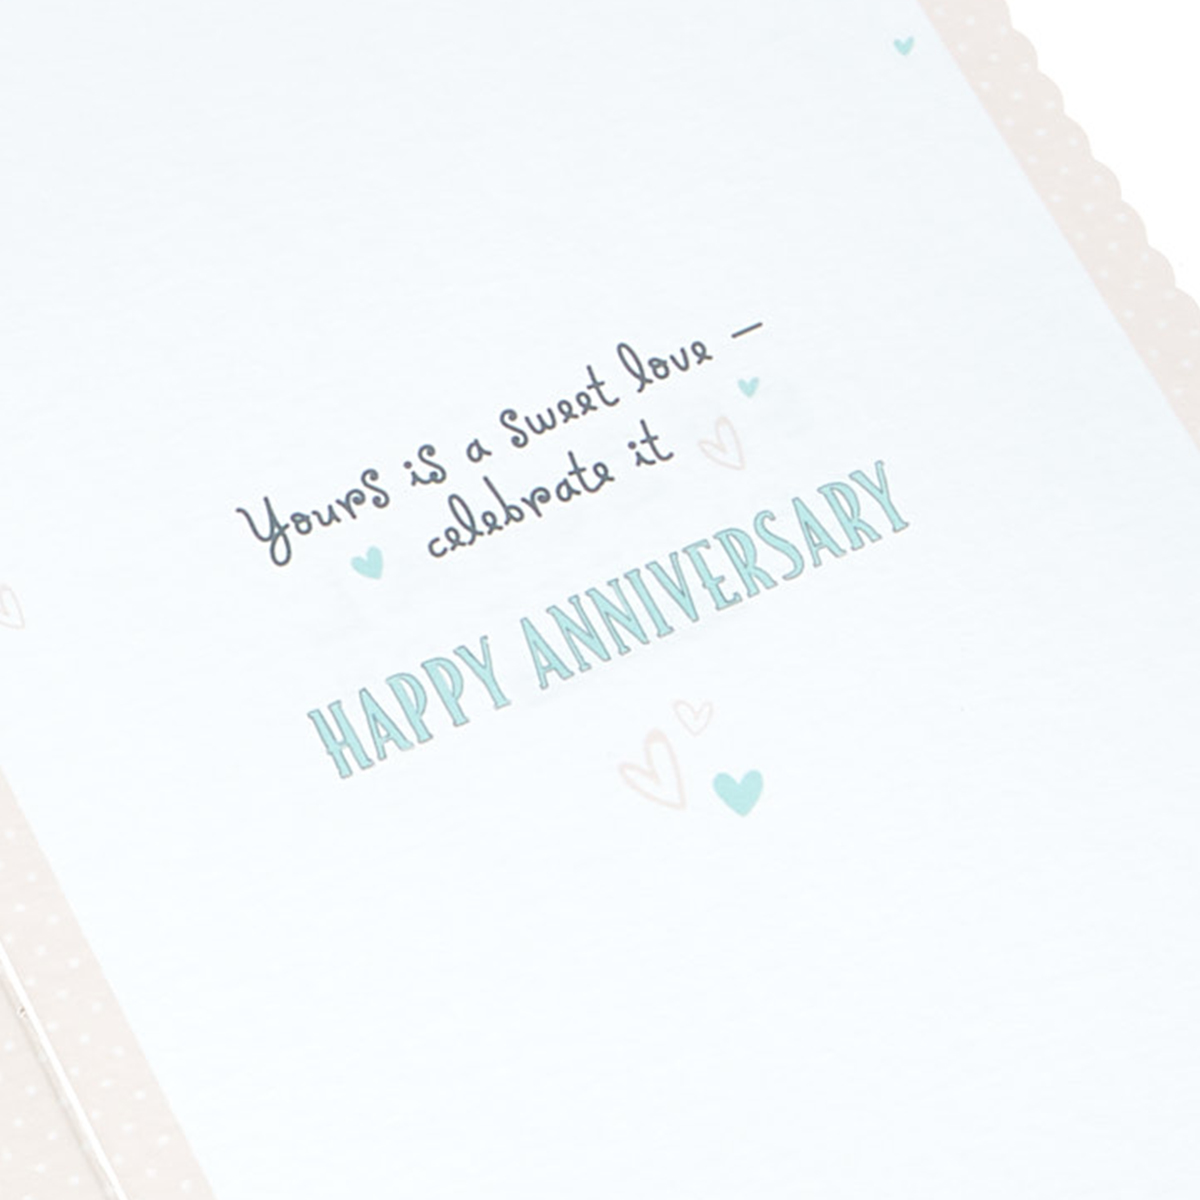 Anniversary Card - Love To Both Of You